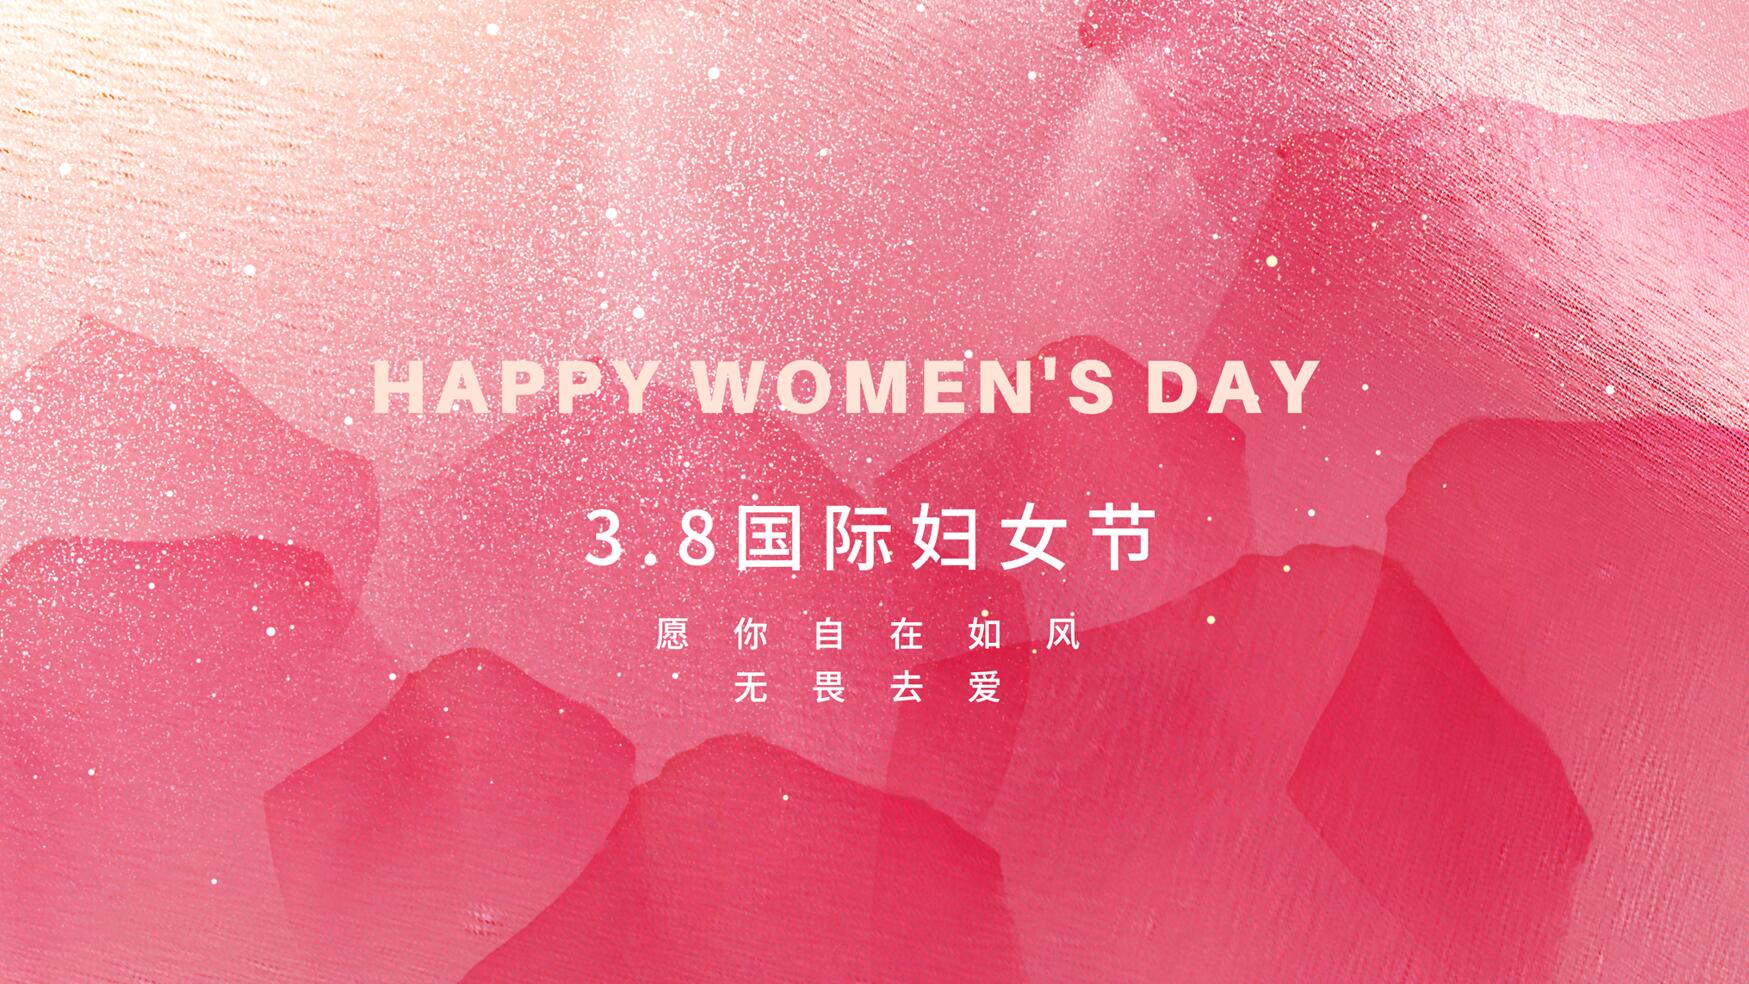 3.8 International Women's Day | Wishing you freedom and unlimited possibilities!